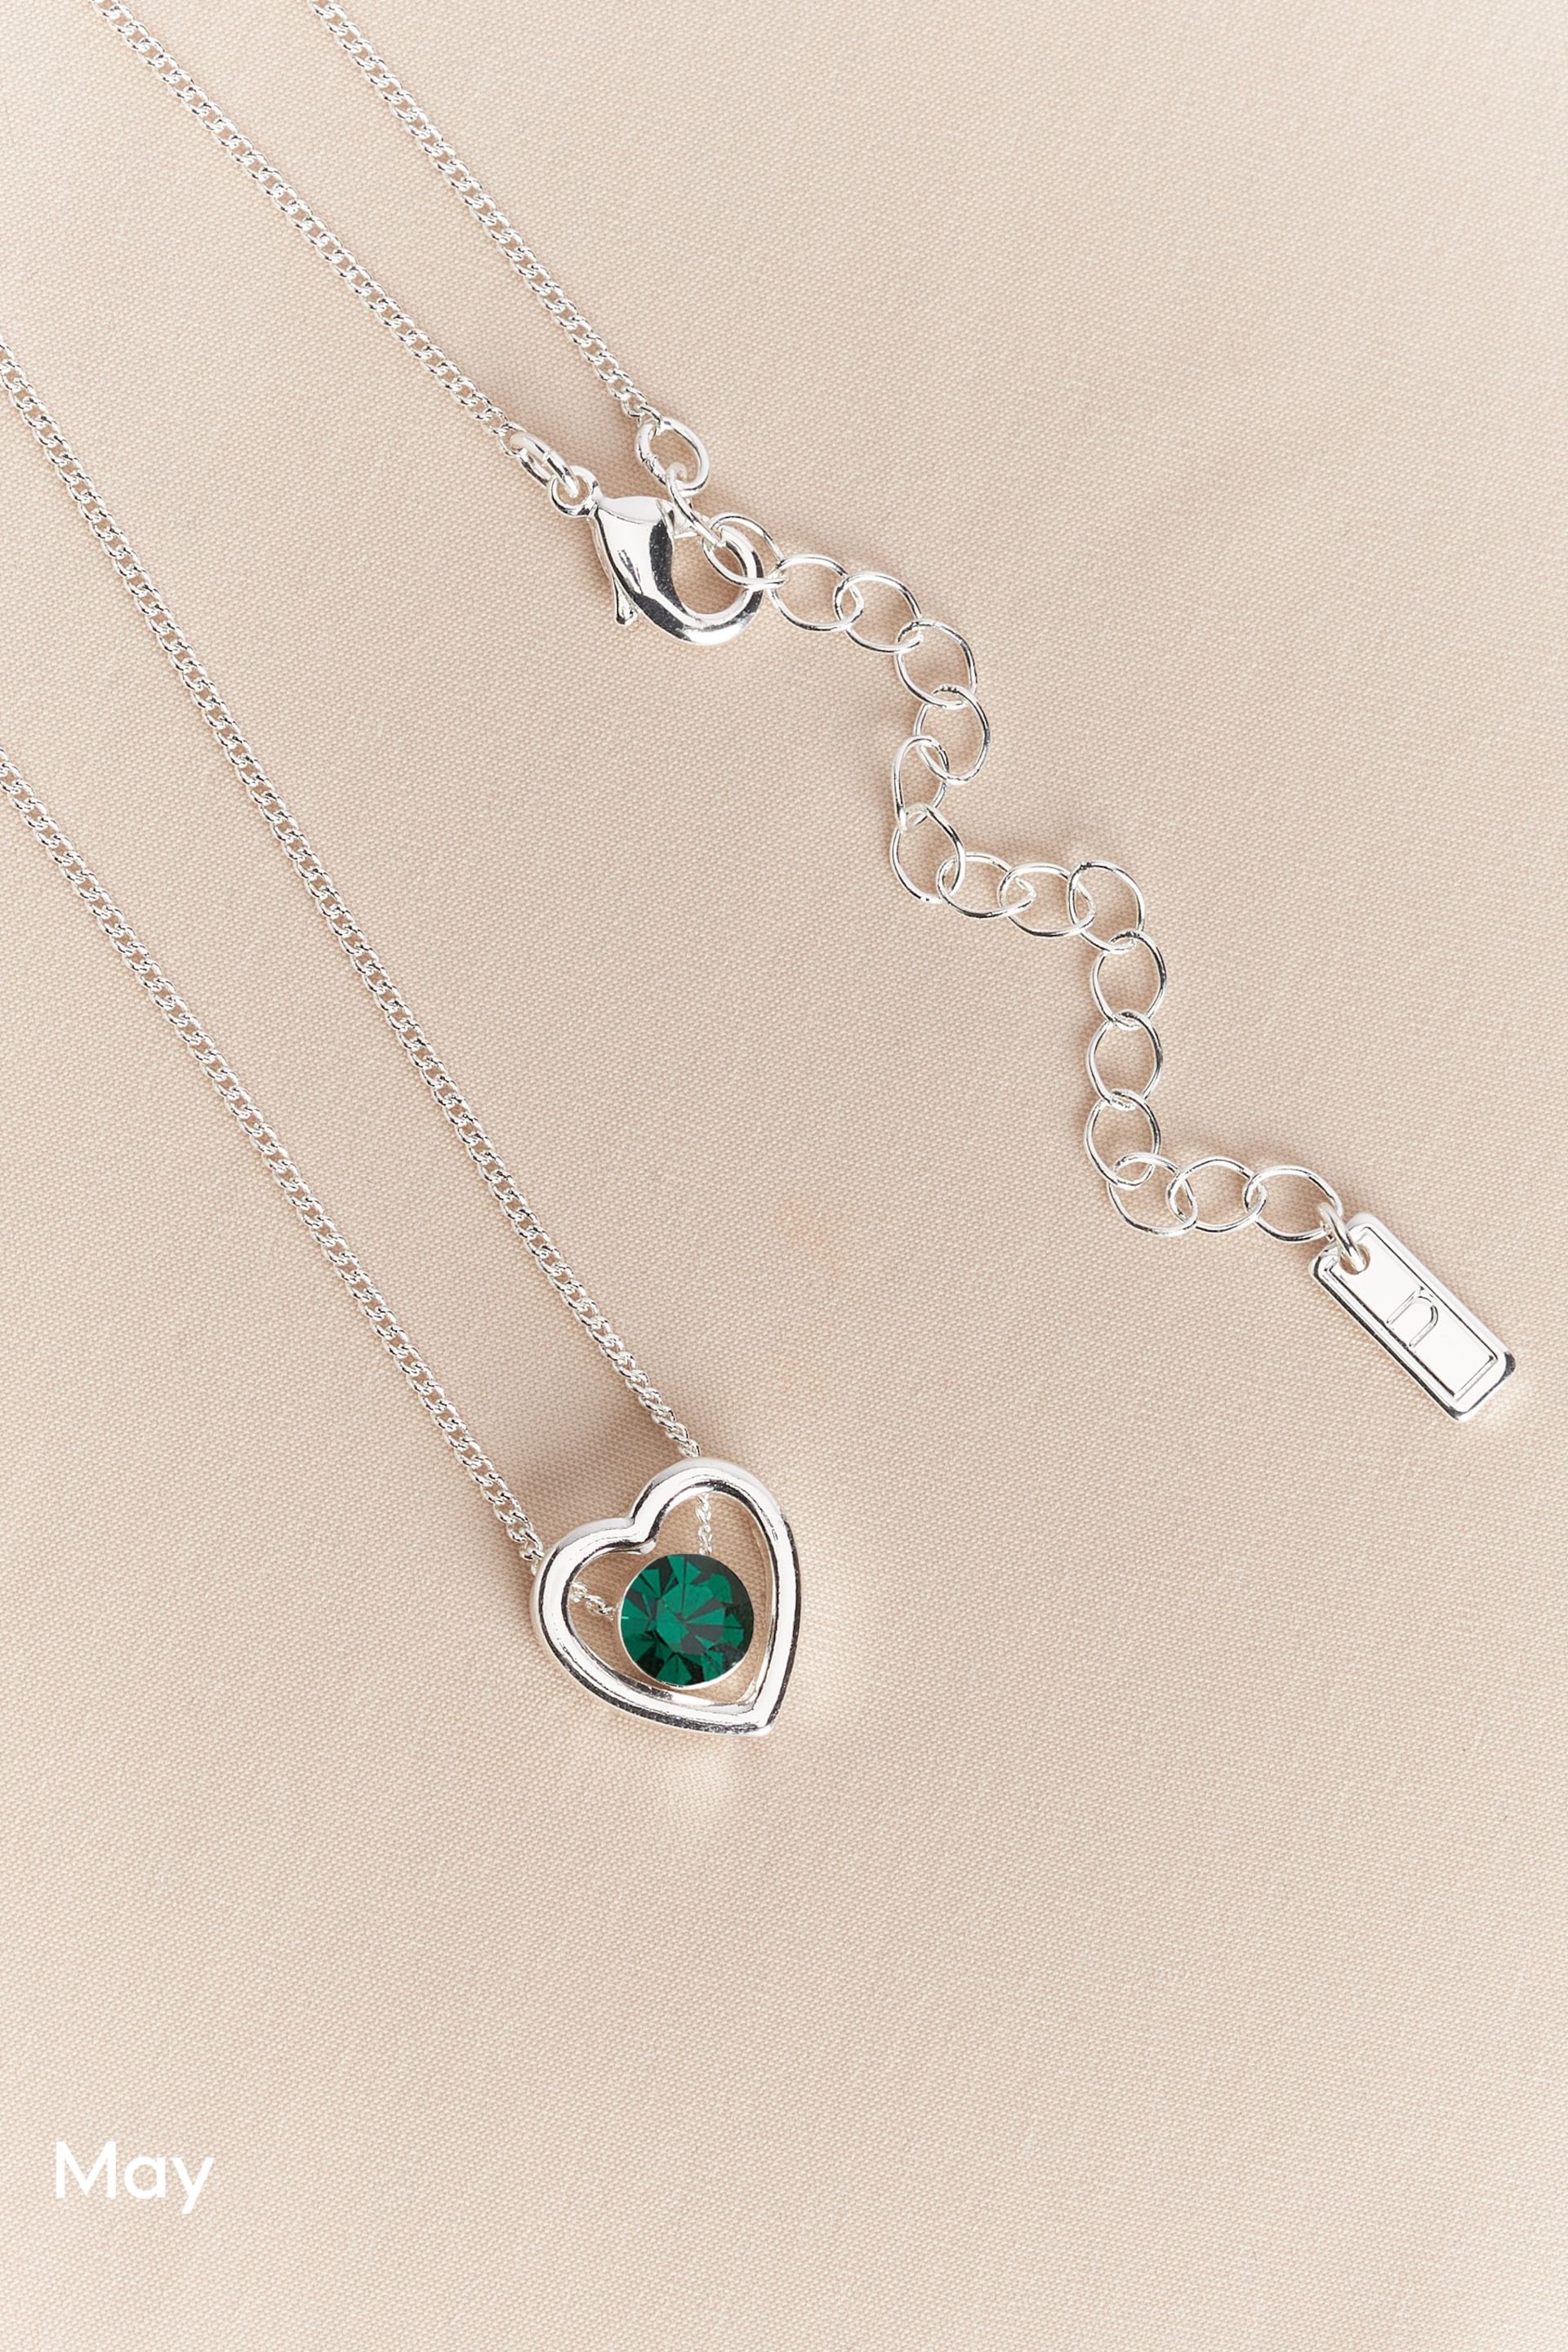 Silver Plated Heart Birthstone Necklace - Image 6 of 13